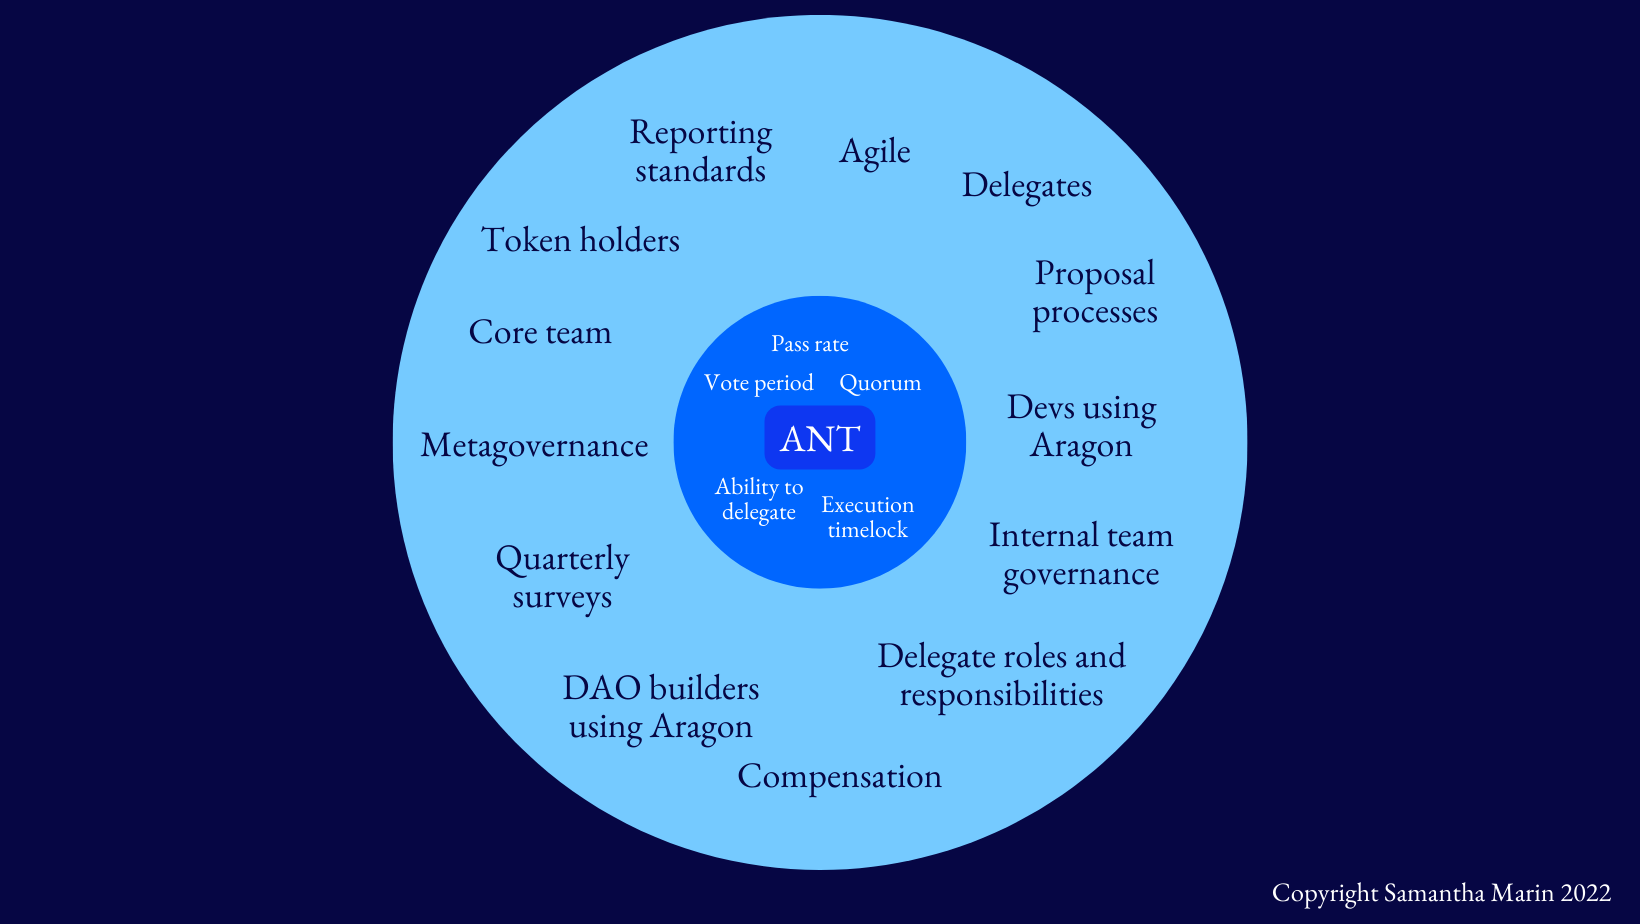 ANT is placed at the center, and the Rules in the center govern ANT. Everything else is not technically enforceable.